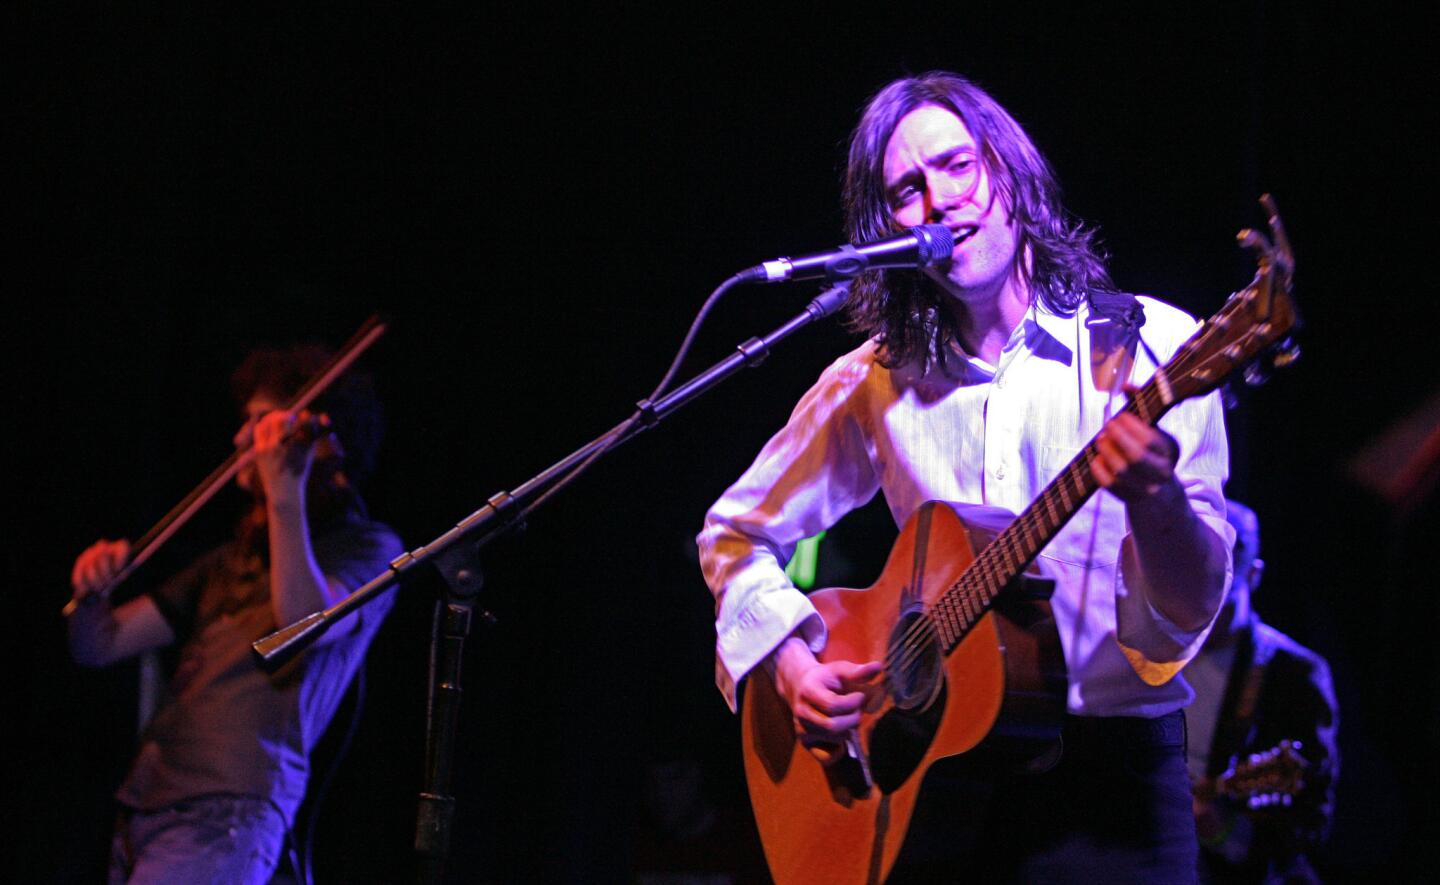 Conor Oberst at a 2007 concert in Los Angeles.